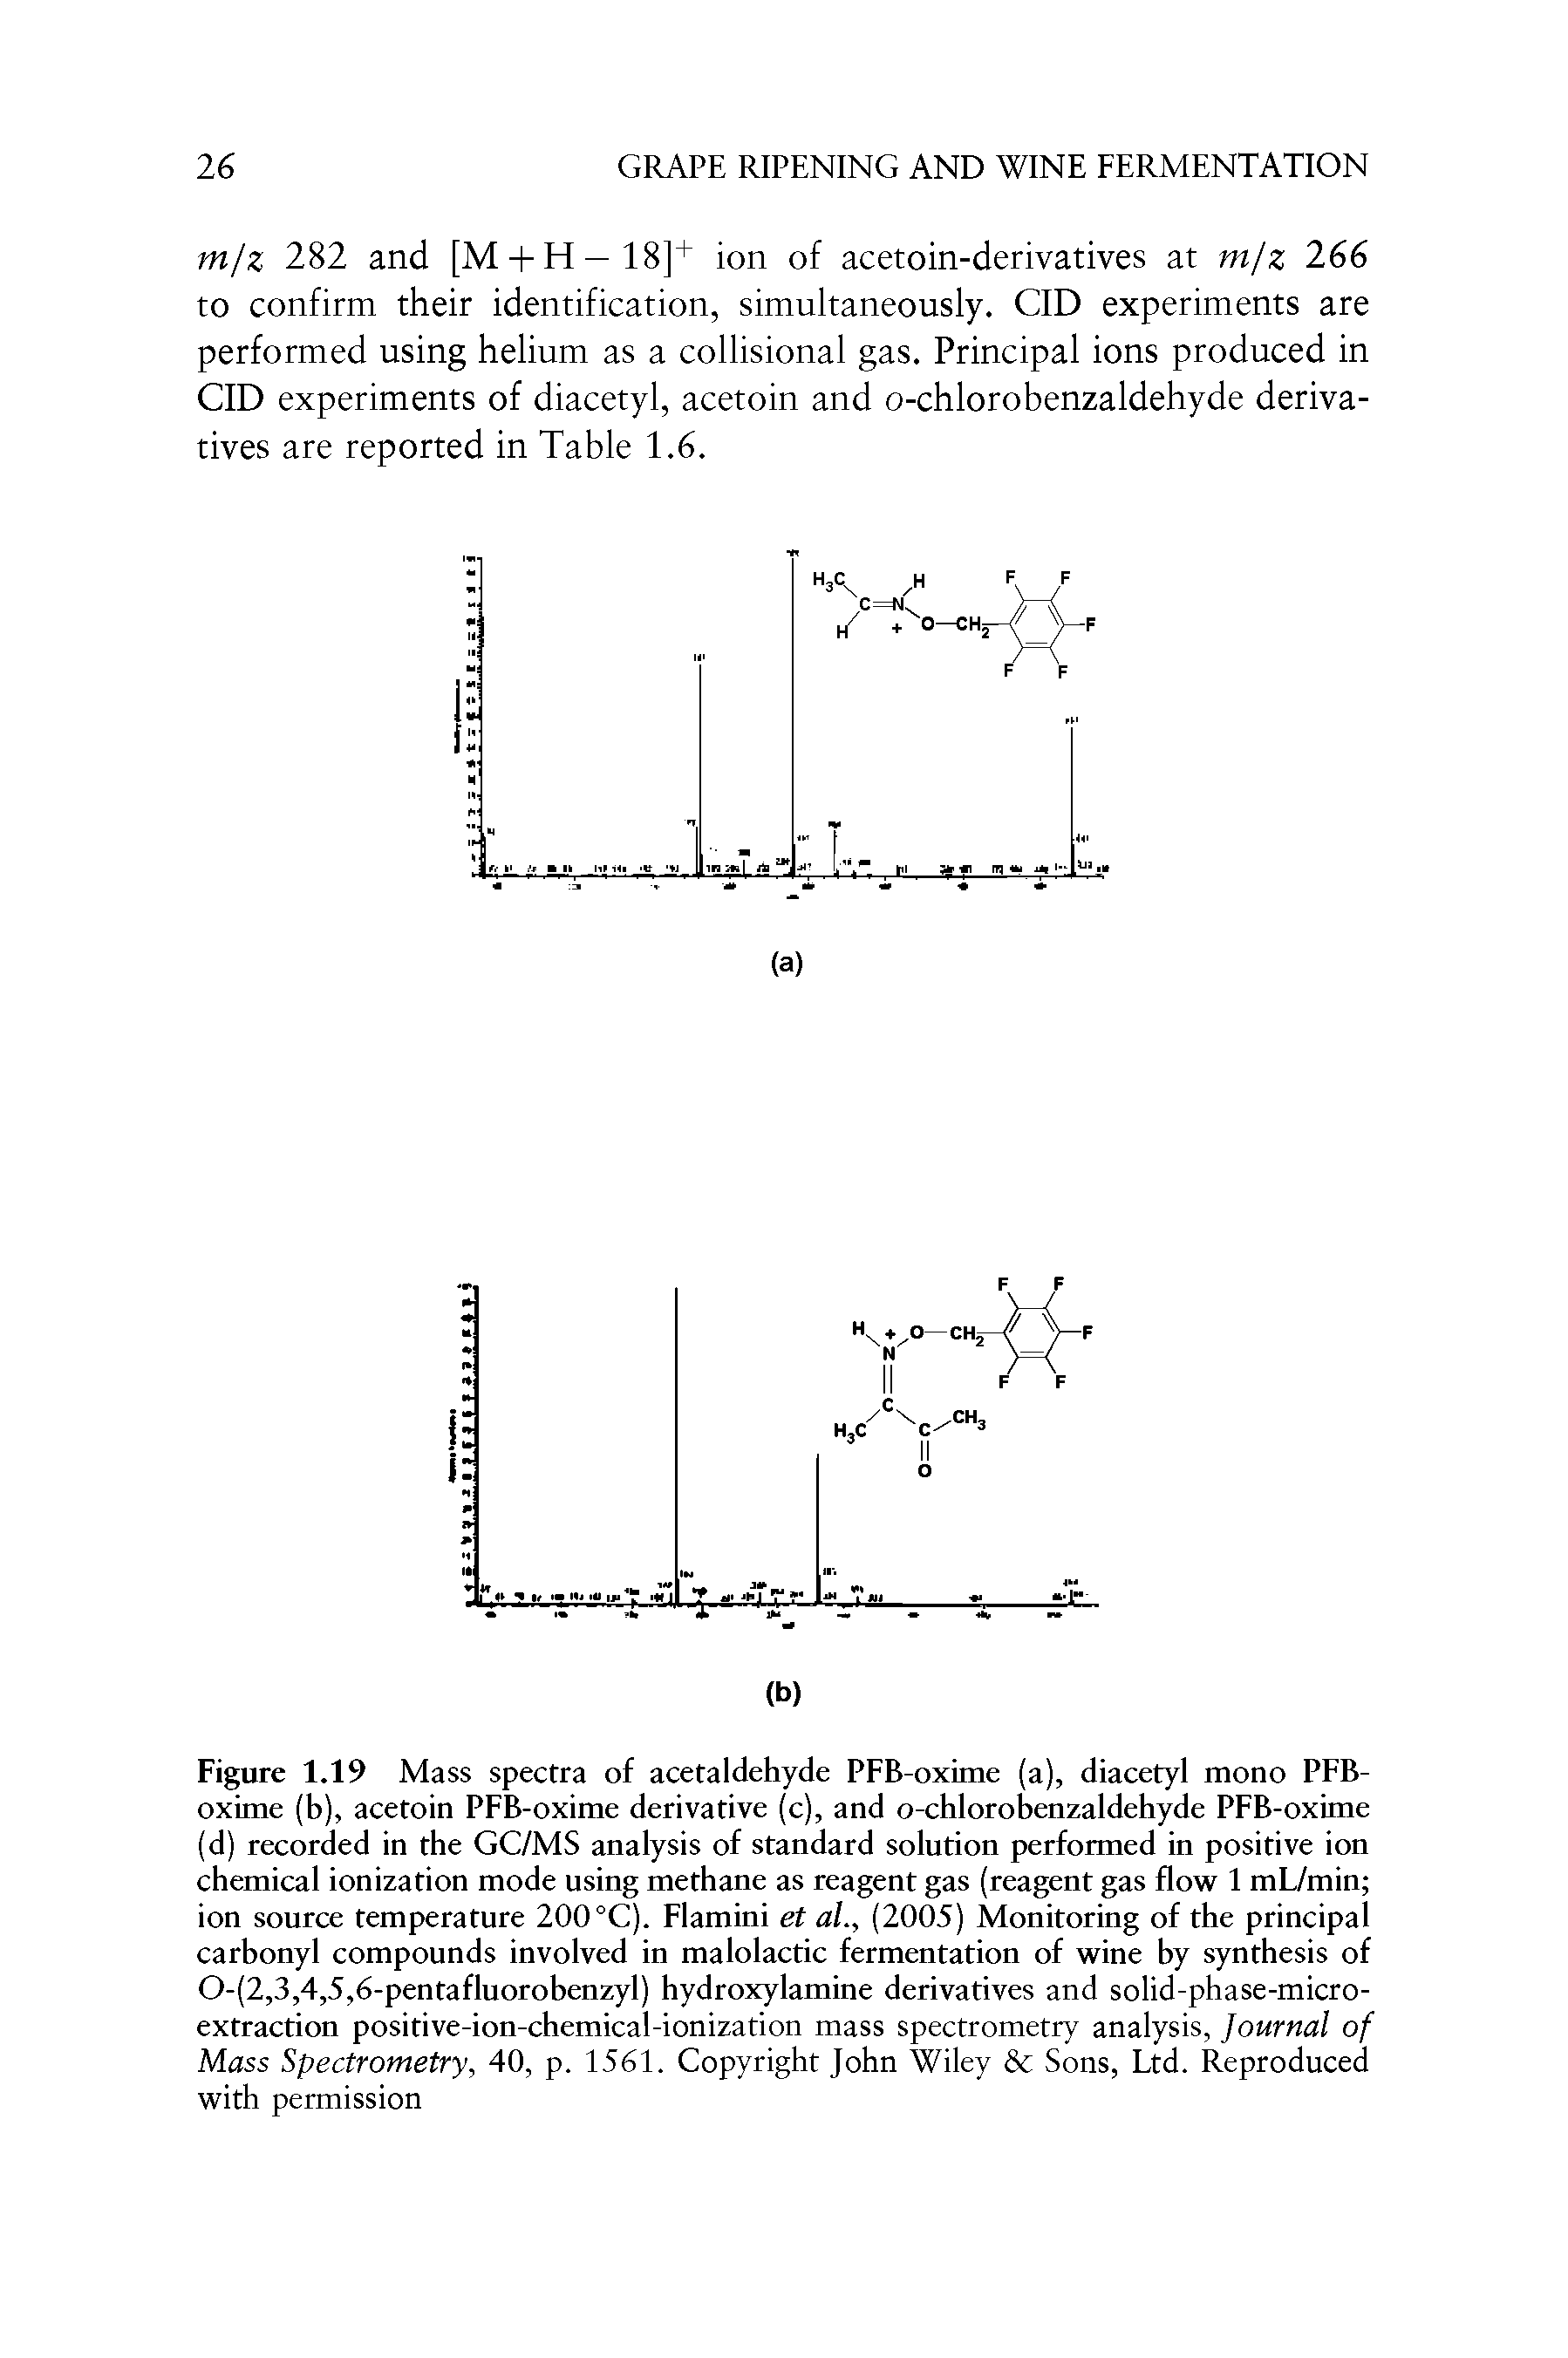 Figure 1.19 Mass spectra of acetaldehyde PFB-oxime (a), diacetyl mono PFB-oxime (b), acetoin PFB-oxime derivative (c), and o-chlorobenzaldehyde PFB-oxime (d) recorded in the GC/MS analysis of standard solution performed in positive ion chemical ionization mode using methane as reagent gas (reagent gas flow 1 mL/min ion source temperature 200 °C). Flamini et al., (2005) Monitoring of the principal carbonyl compounds involved in malolactic fermentation of wine by synthesis of 0-(2,3,4,5,6-pentafluorobenzyl) hydroxylamine derivatives and solid-phase-microextraction positive-ion-chemical-ionization mass spectrometry analysis, Journal of Mass Spectrometry, 40, p. 1561. Copyright John Wiley Sons, Ltd. Reproduced with permission...